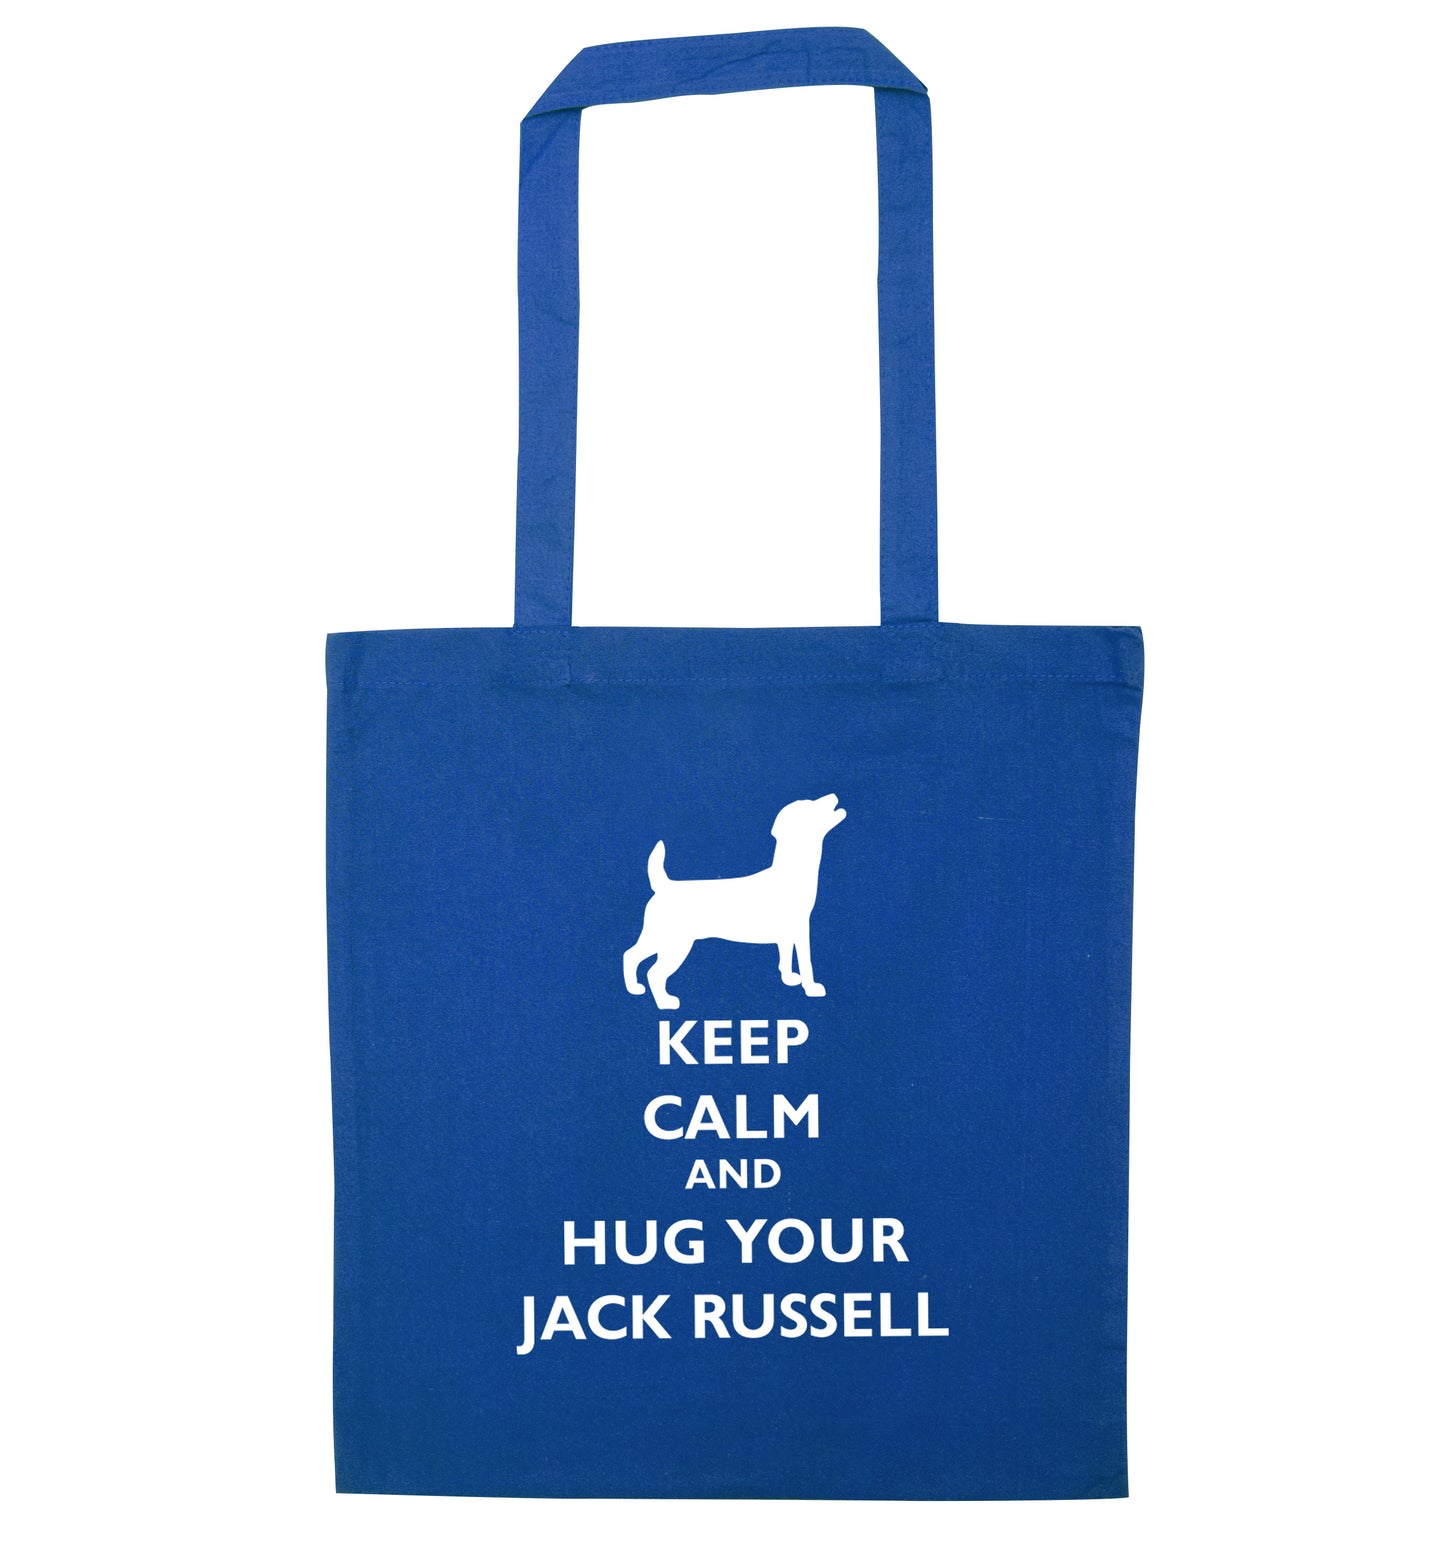 Keep calm and hug your jack russell blue tote bag